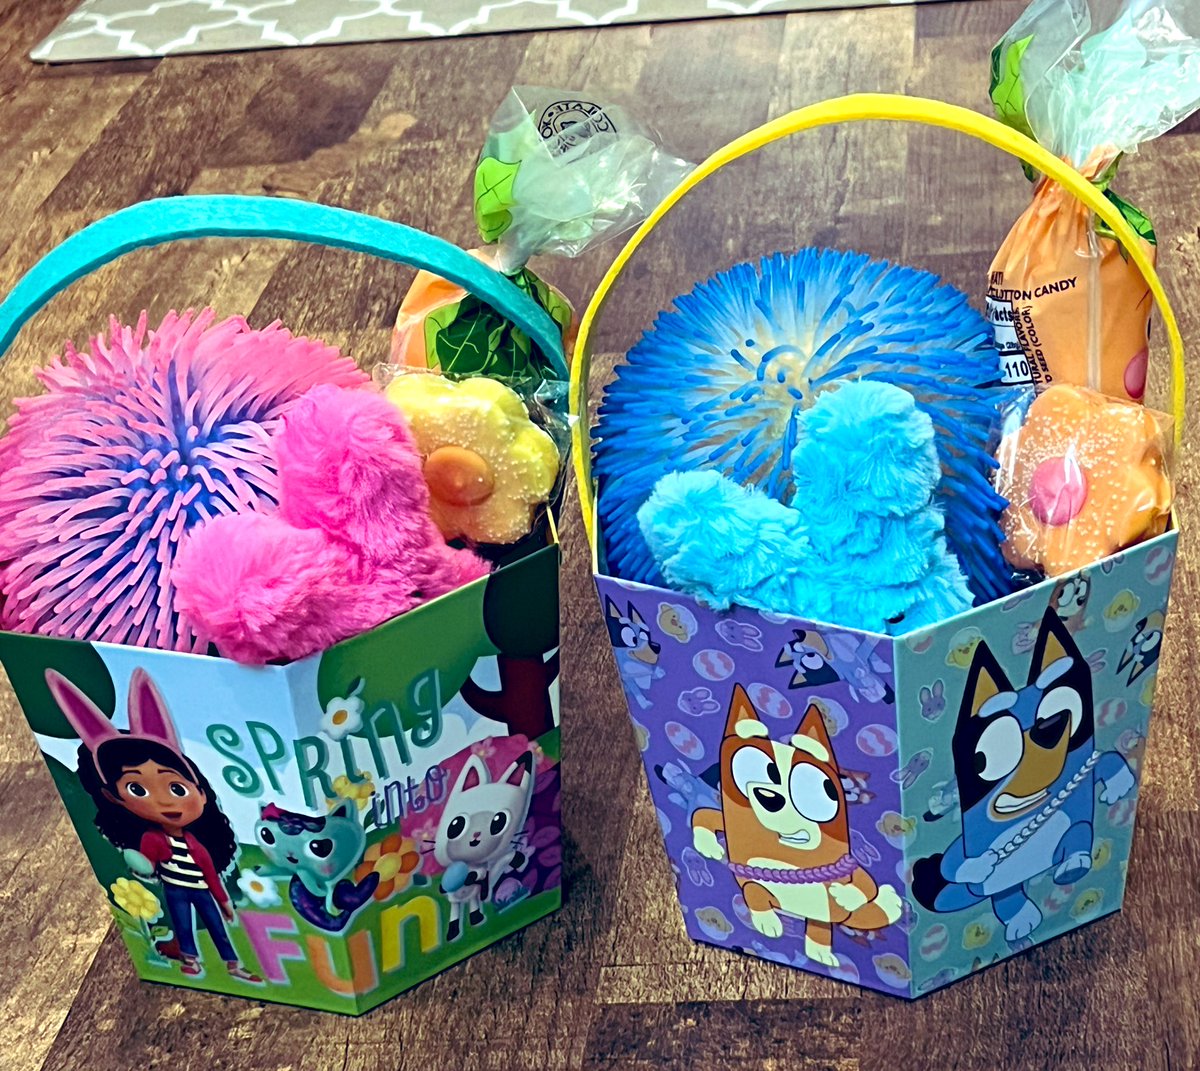 Put together baskets for my son and his bestie, can’t wait to see their faces tomorrow 💕 #Easter #EasterHolidays #EasterBasket  and later tomorrow dying eggs and an egg hunt 🐰🥚🐣 #egghunt #goodvibes